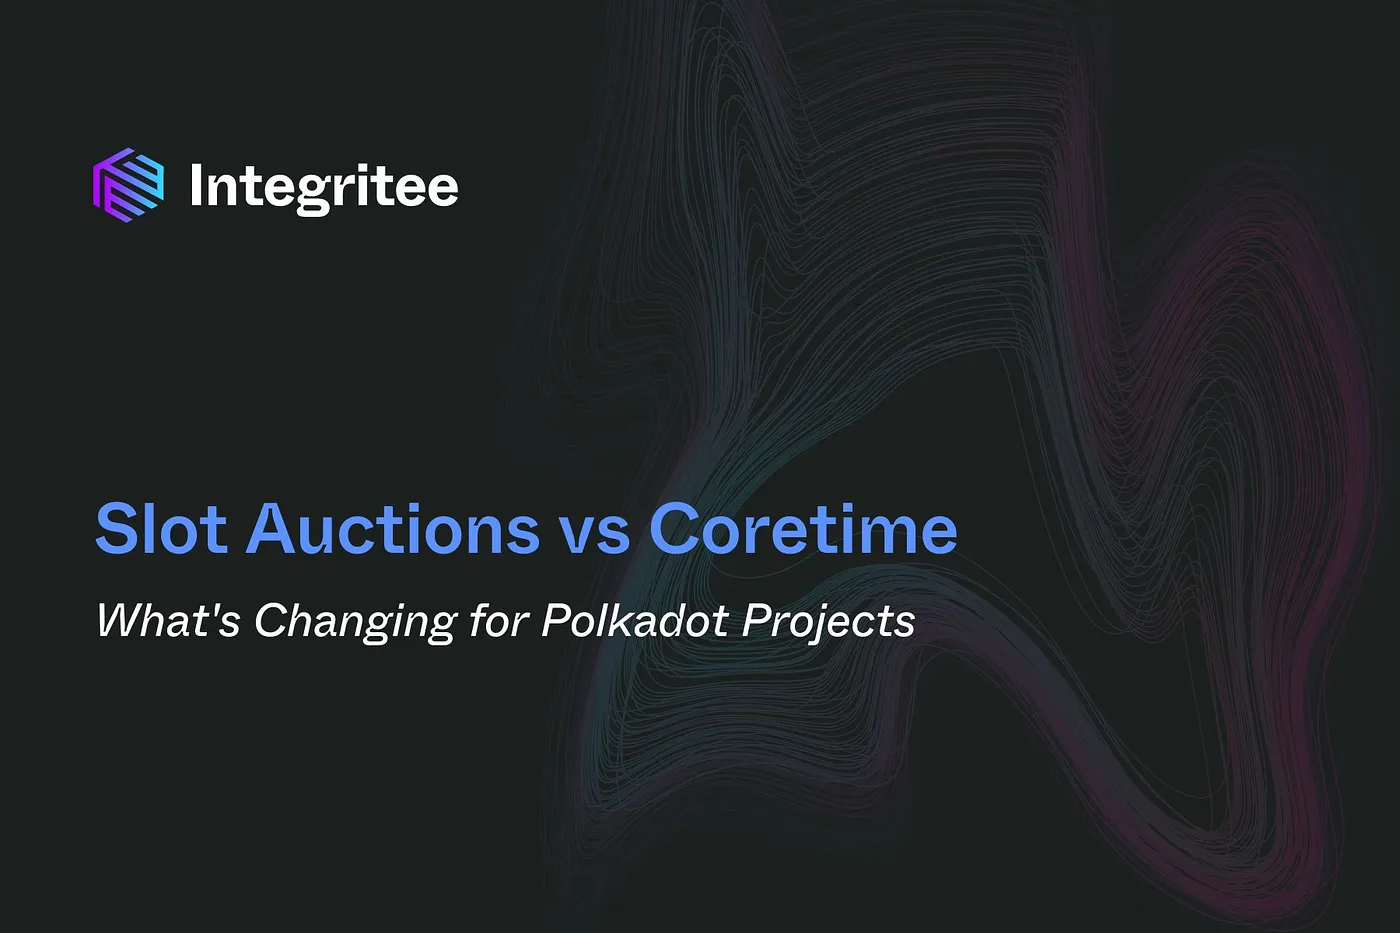 Slot Auctions vs Coretime: What’s Changing for Polkadot Projects